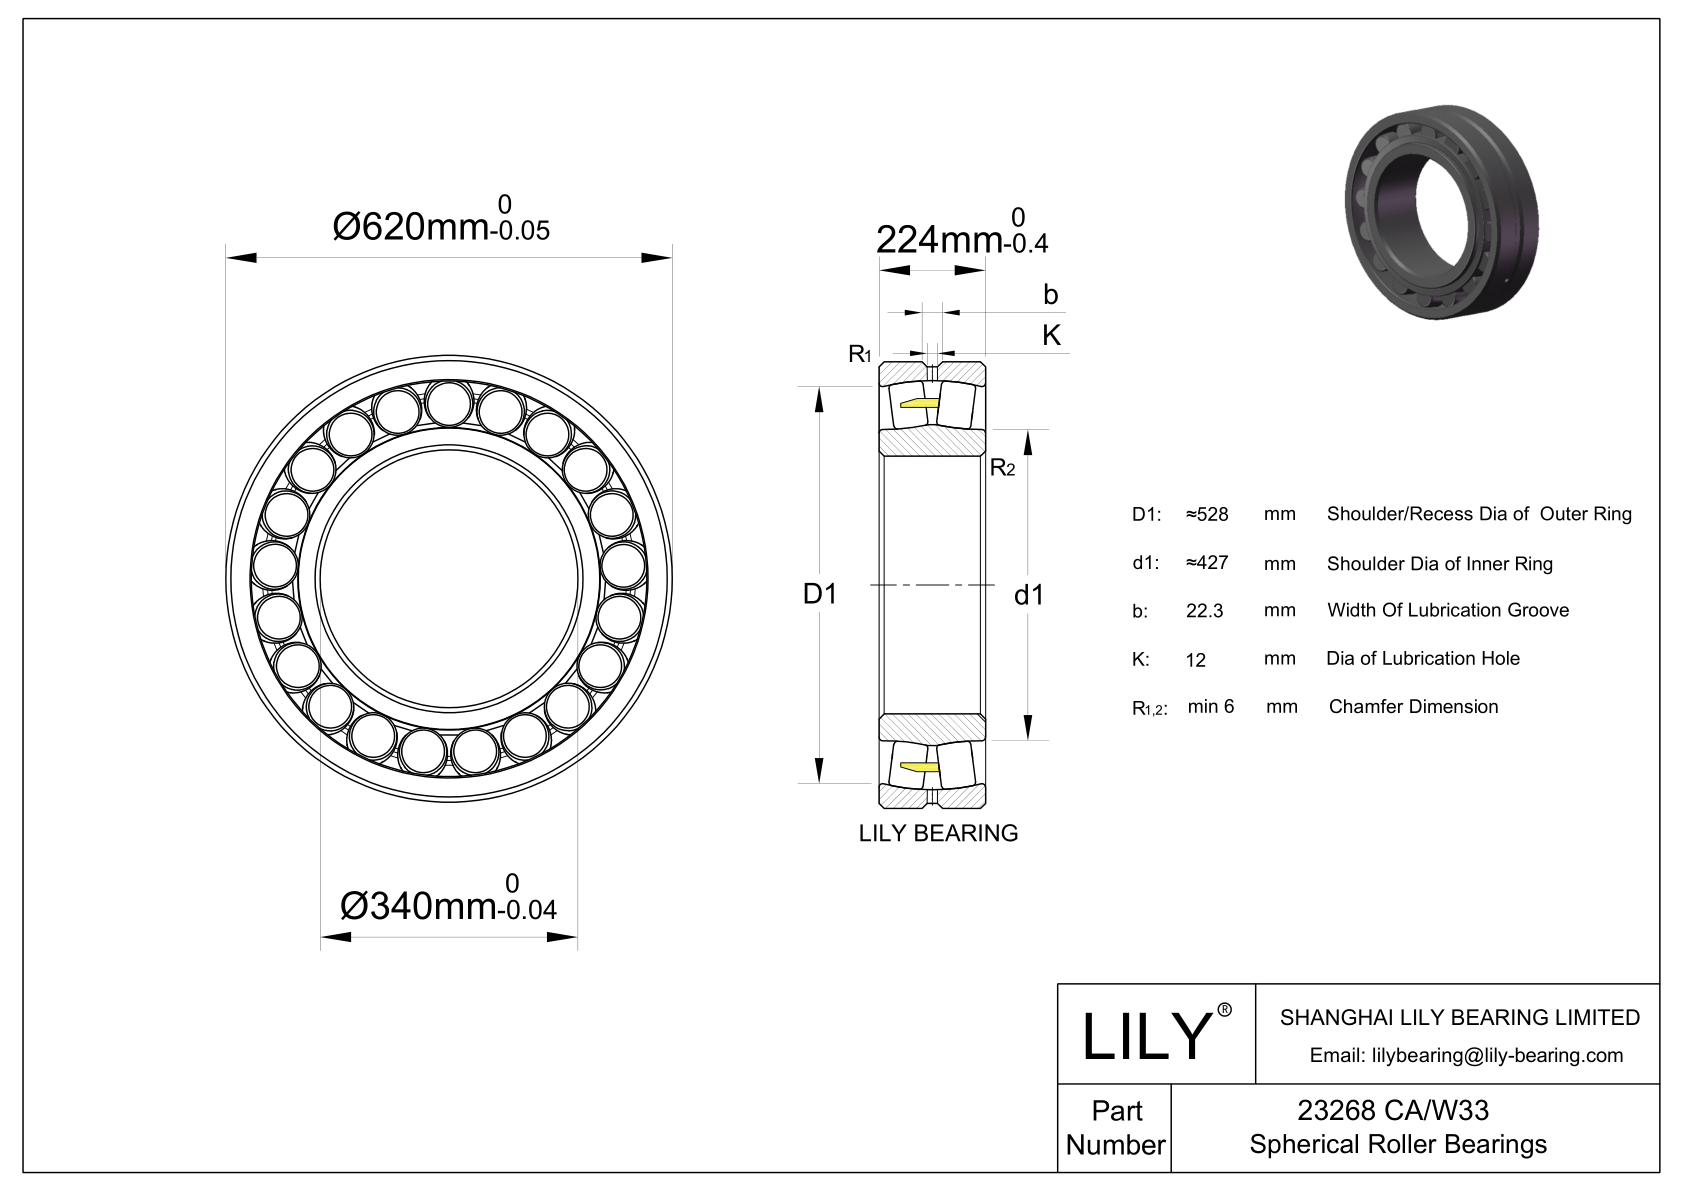 23268 CA/W33 Double Row Spherical Roller Bearing cad drawing